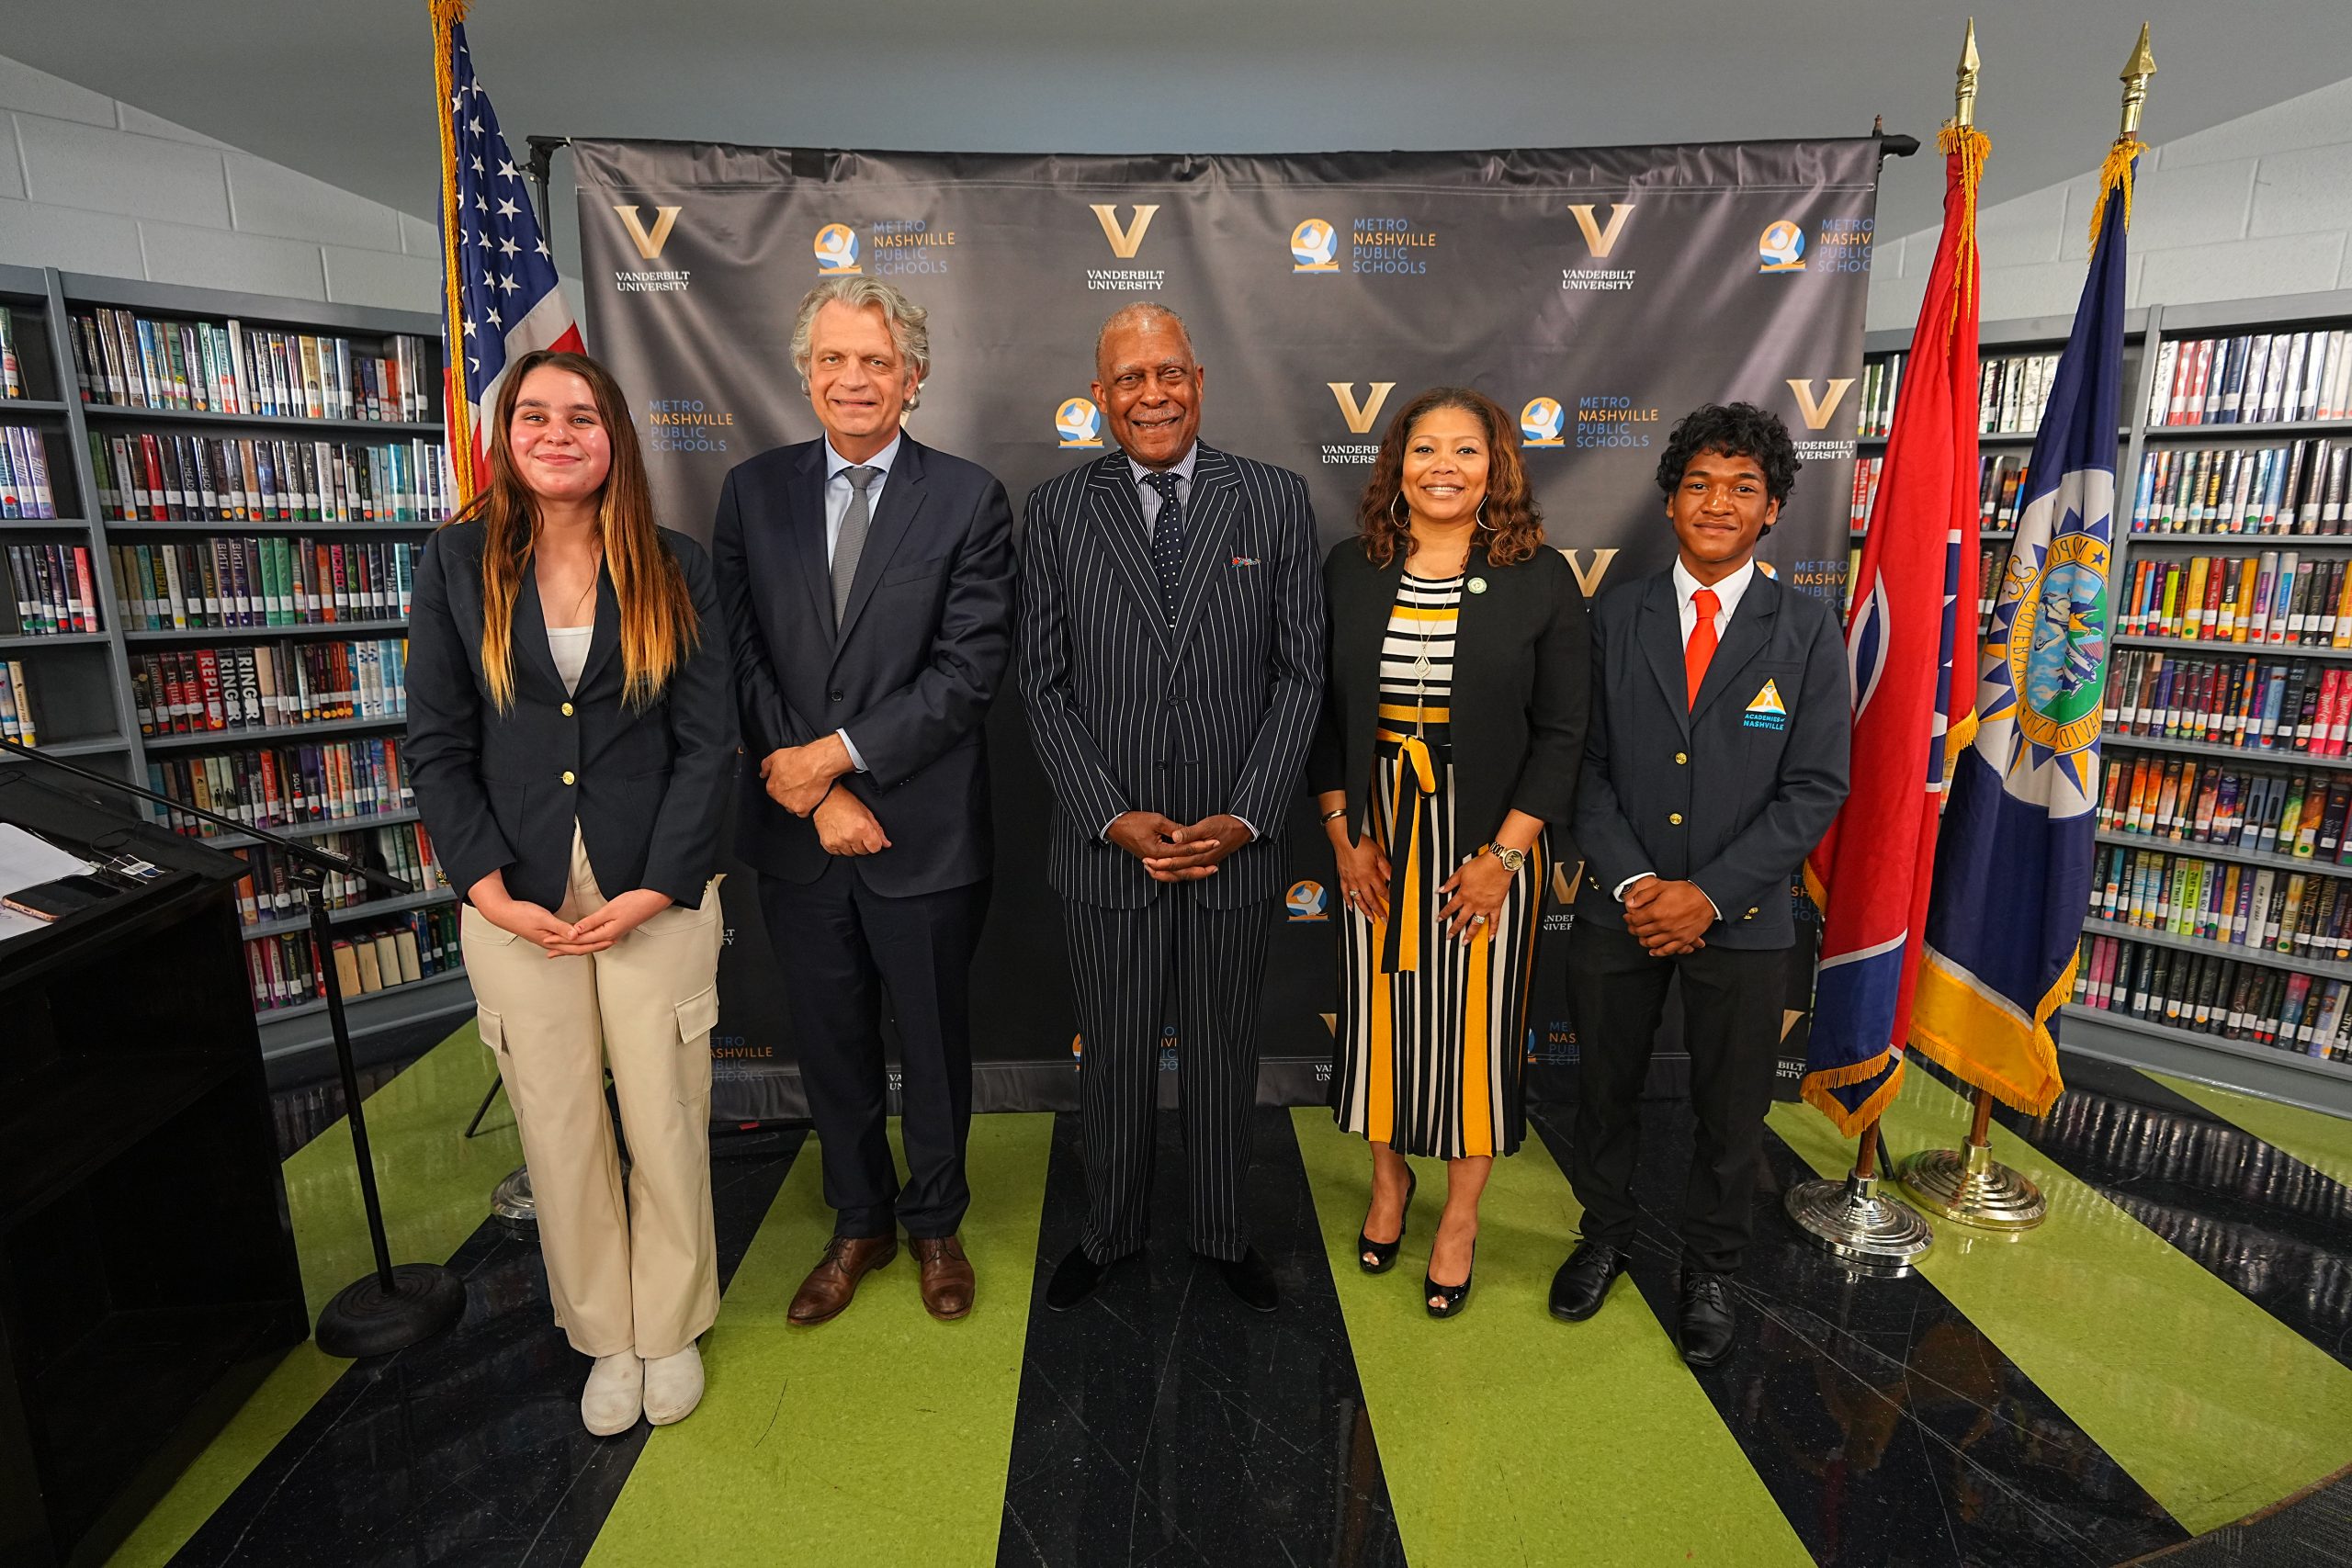 Vanderbilt University and Metro Nashville Public Schools announce a new partnership to boost college admissions from Nashville schools at a May 1 news conference.